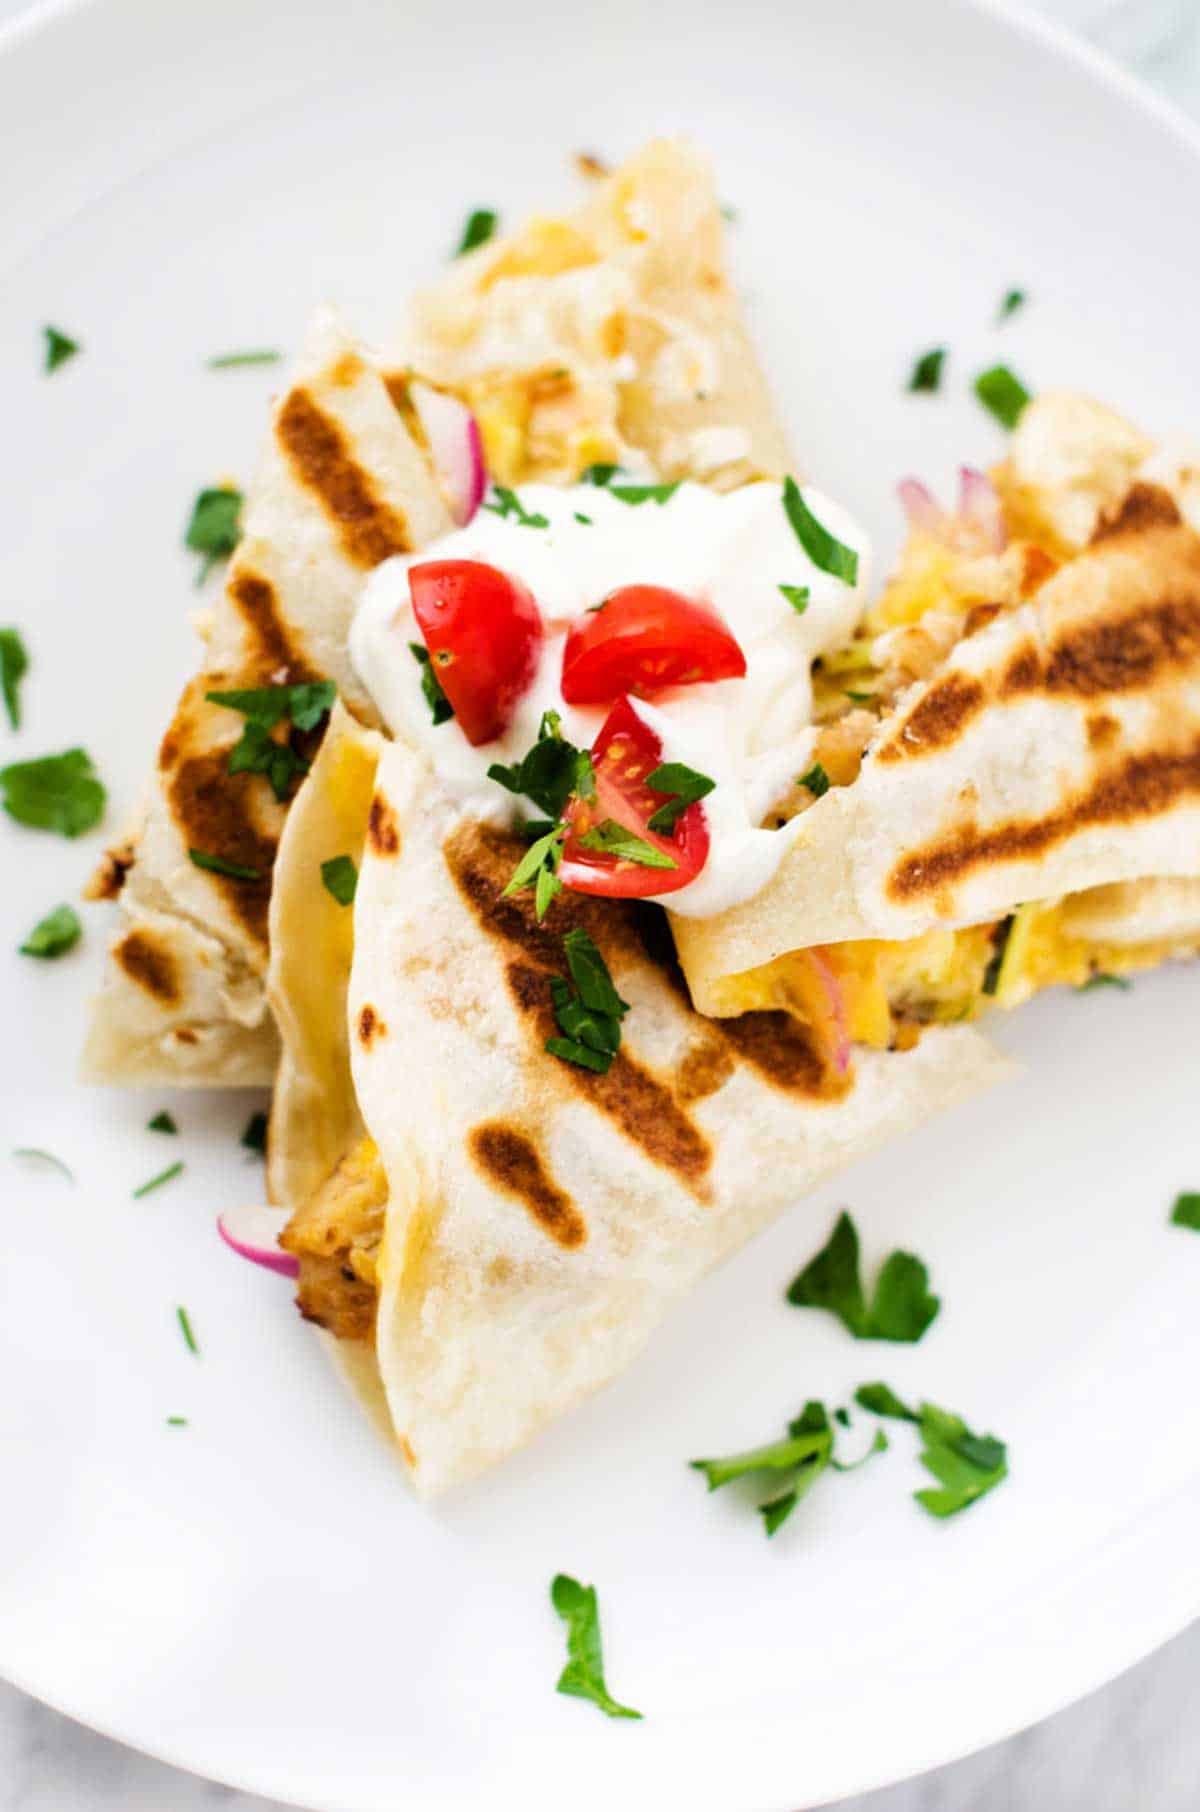 Close up photo of grilled quesadillas on a white plate garnished with sour cream, tomato and cilantro.